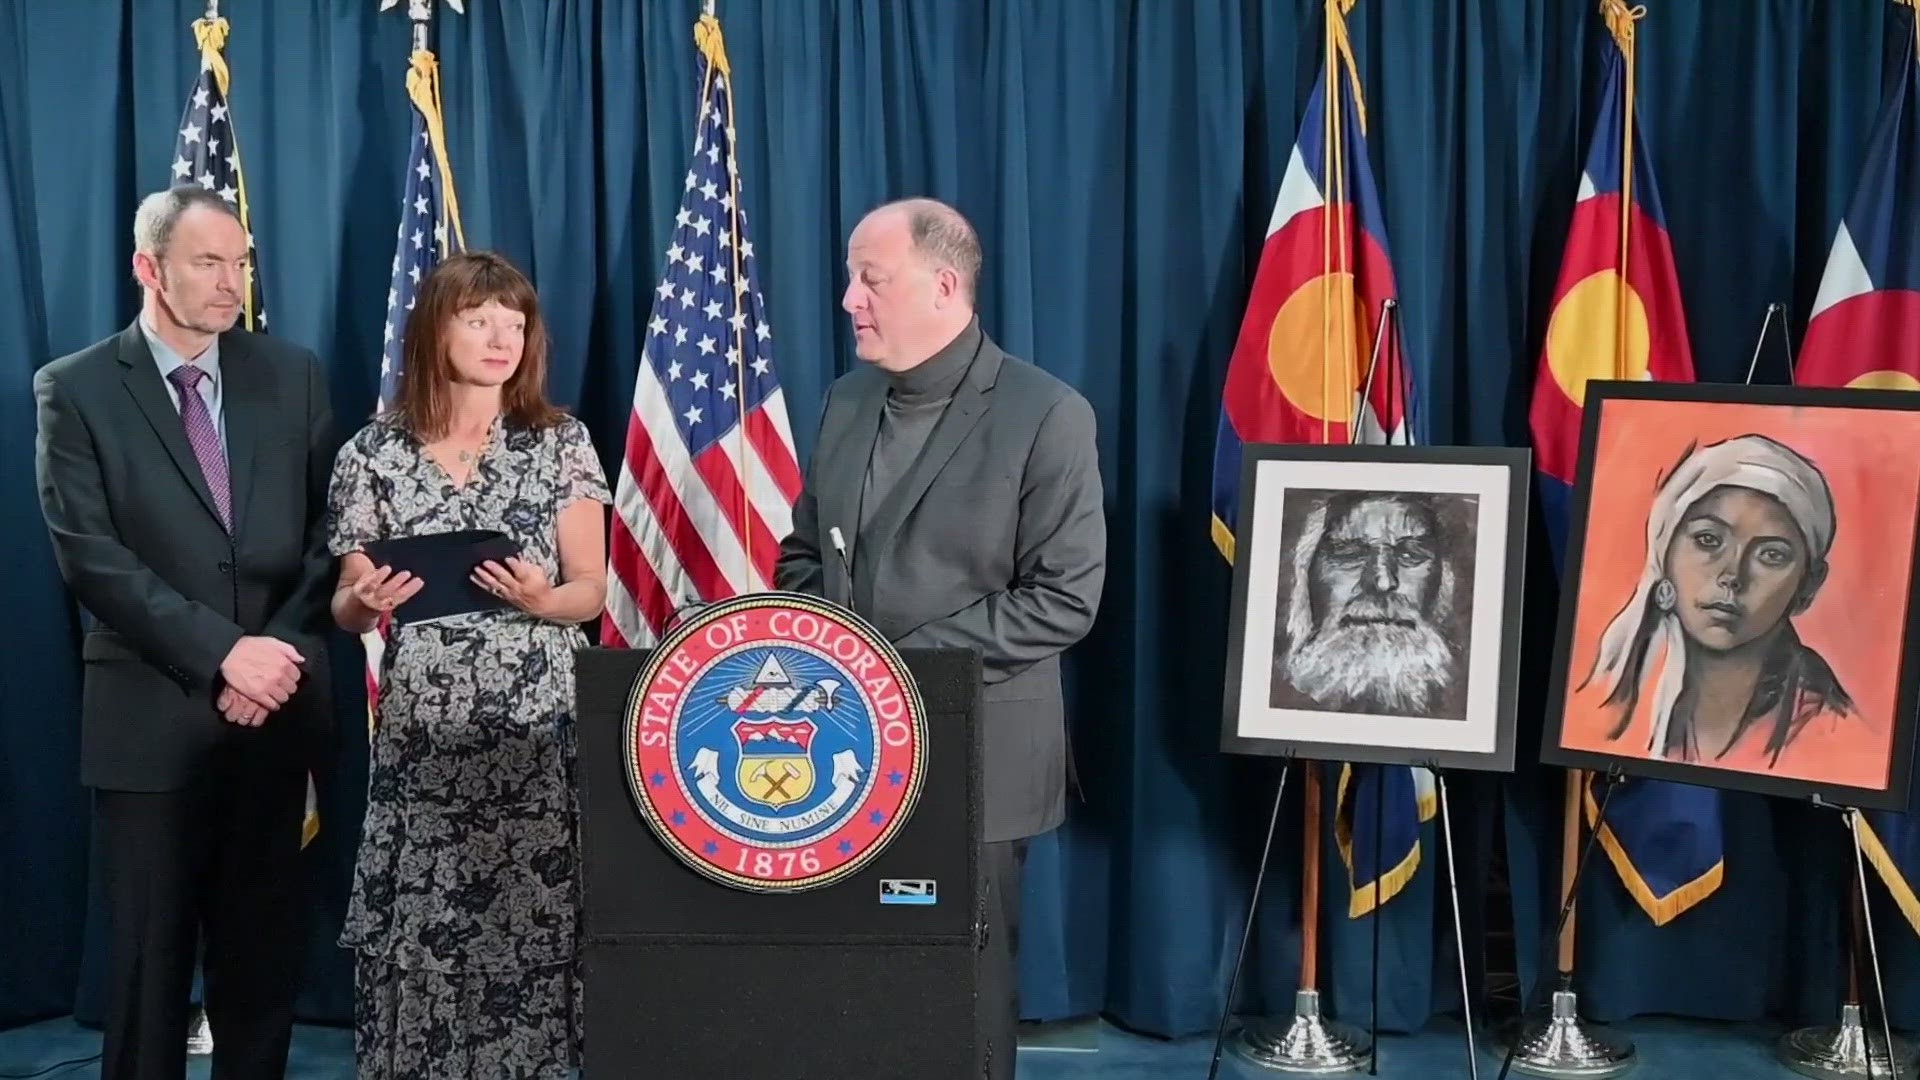 Gov. Jared Polis made the proclamation at a small ceremony where he also dedicated some of Glass's artwork, which will hang in the state capitol.